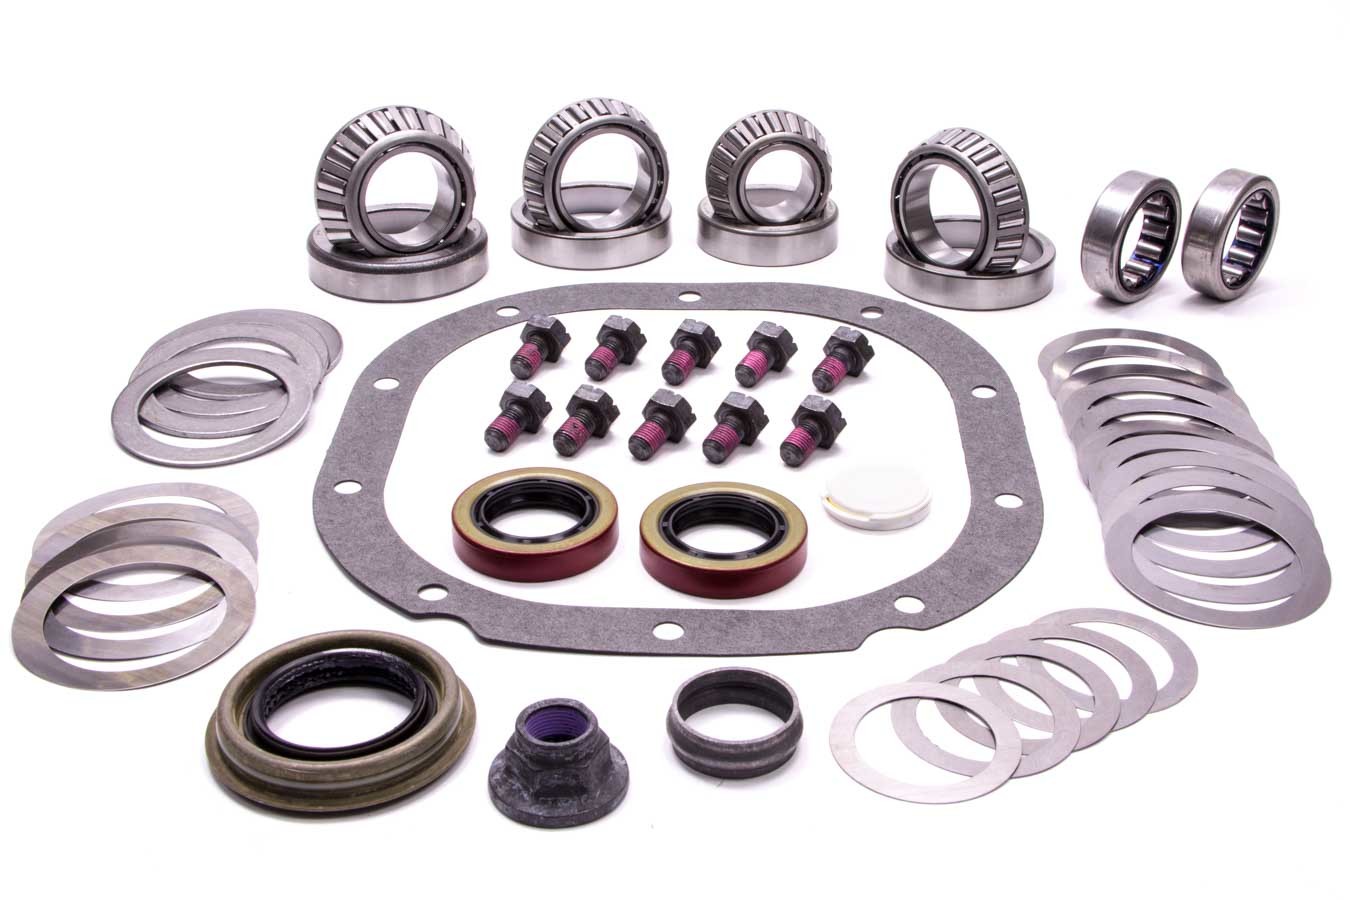 Ford Performance M4210-C3 Differential Installation Kit, Complete, Bearings / Crush Sleeve / Gaskets / Hardware / Seals / Shims / Marking Compound, Ford 8.8 in, Kit